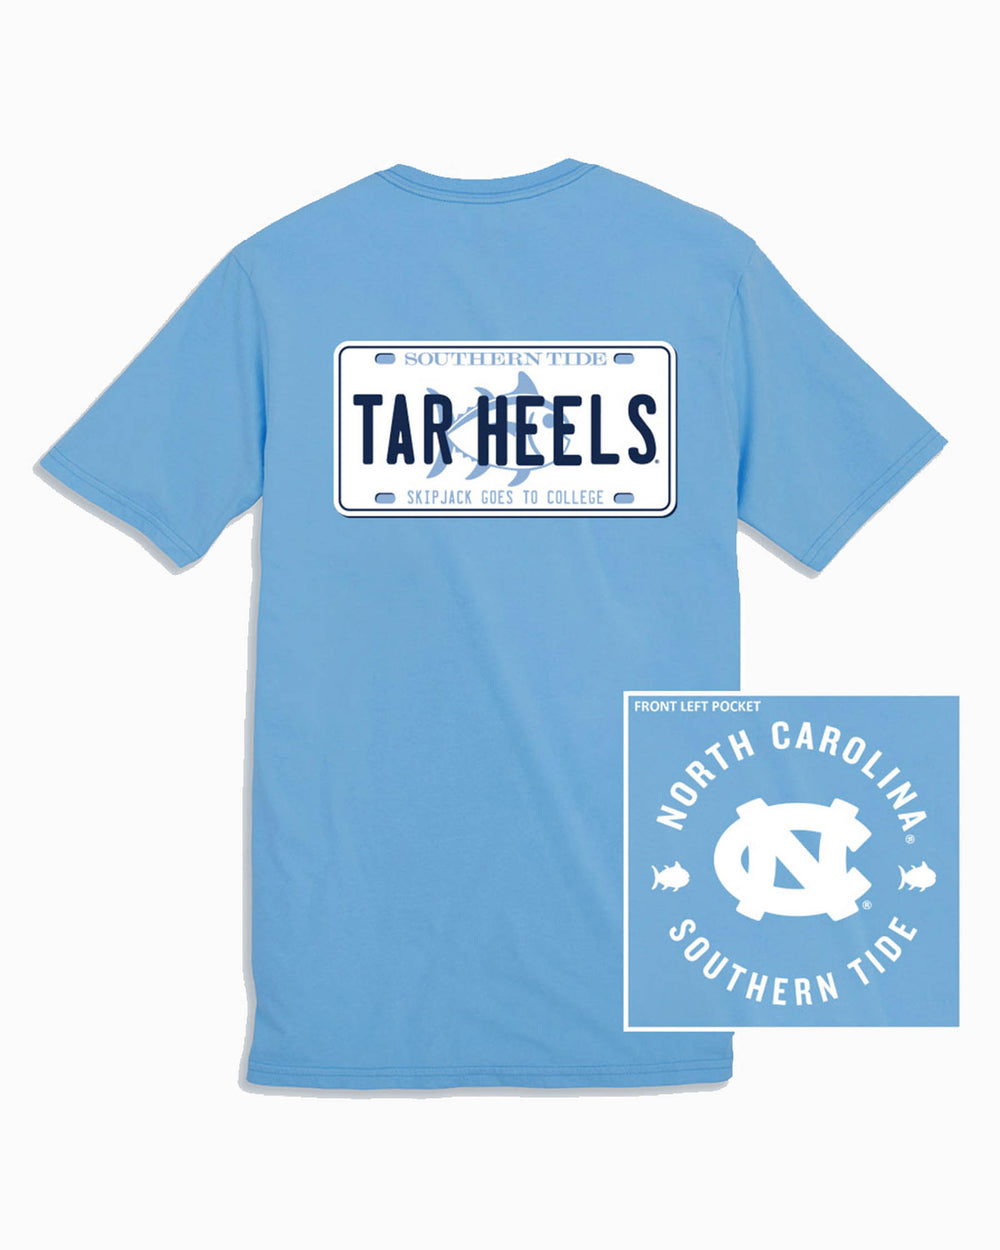 The front and back view of the UNC Tar Heels License Plate T-Shirt by Southern Tide - Rush Blue